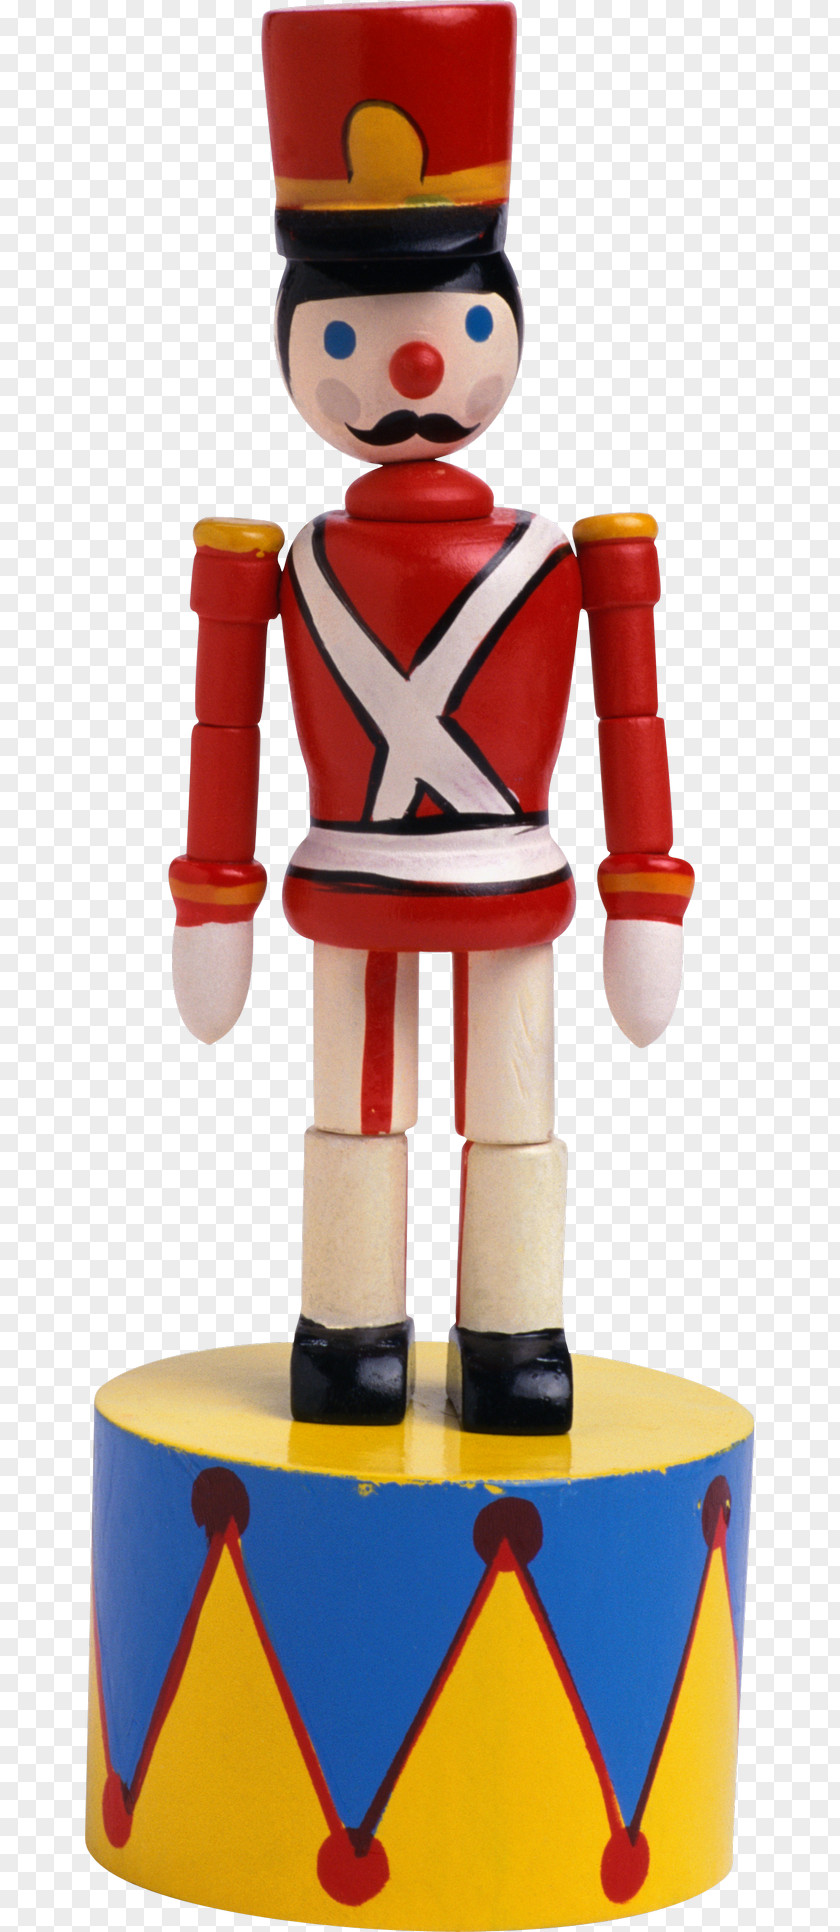 Toy Soldier Clip Art PNG